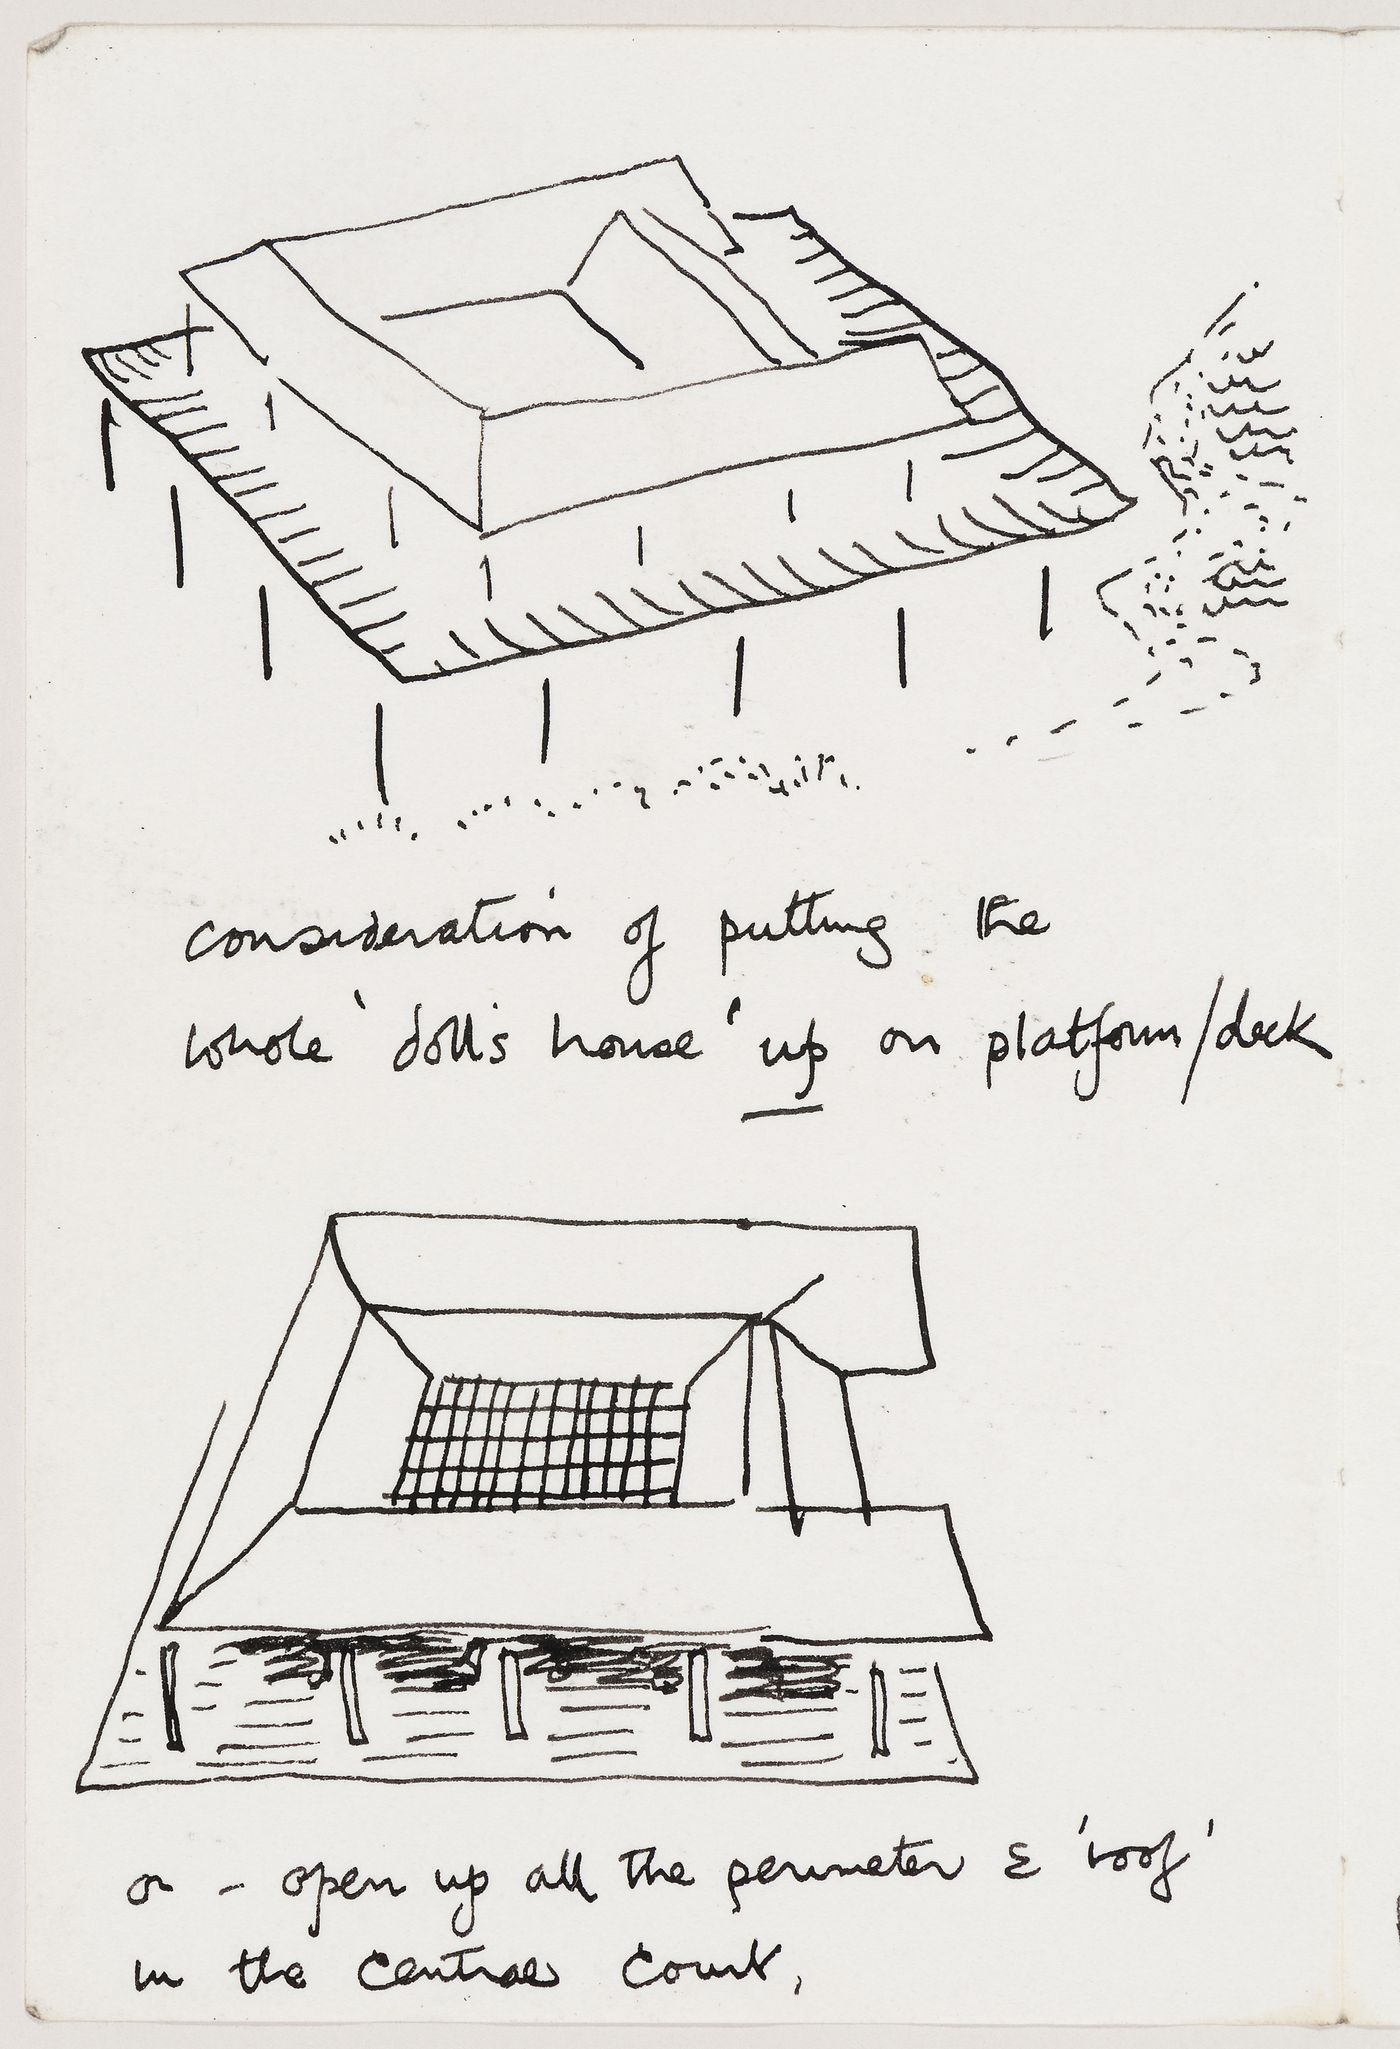 Perthut House: conceptual sketches for design alternatives: a house on a platform or with perimeter and roof open at centre court